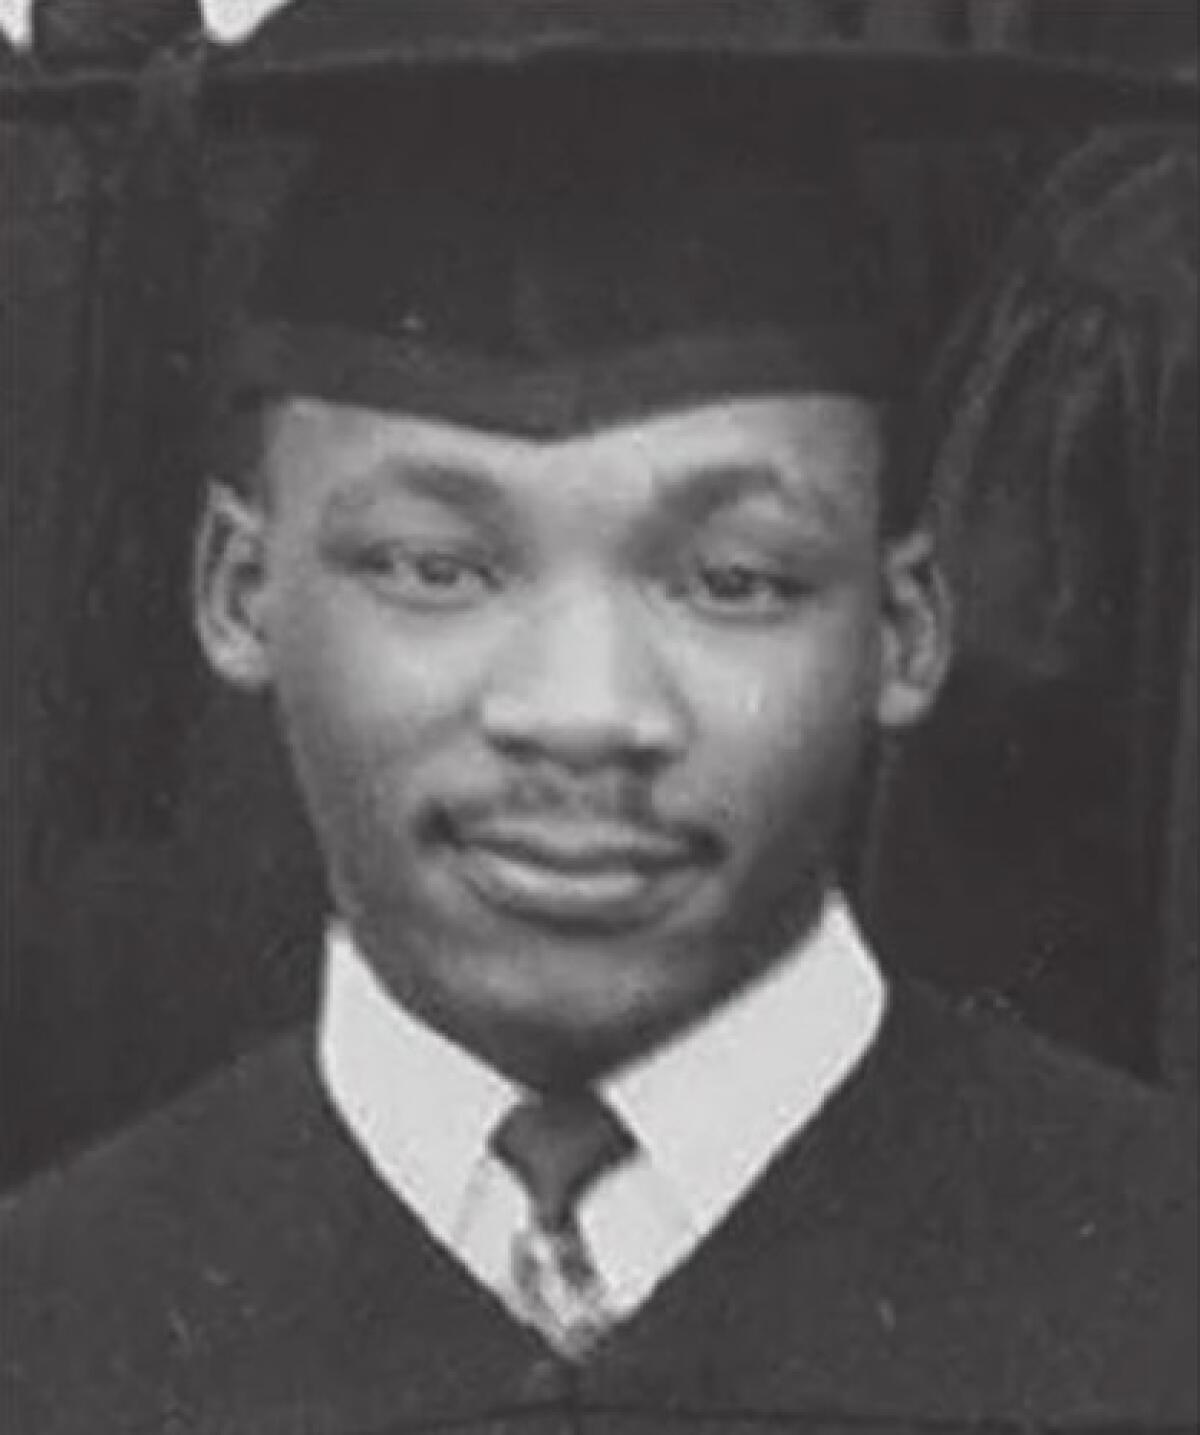 A Black man in a graduation cap and gown and tie.